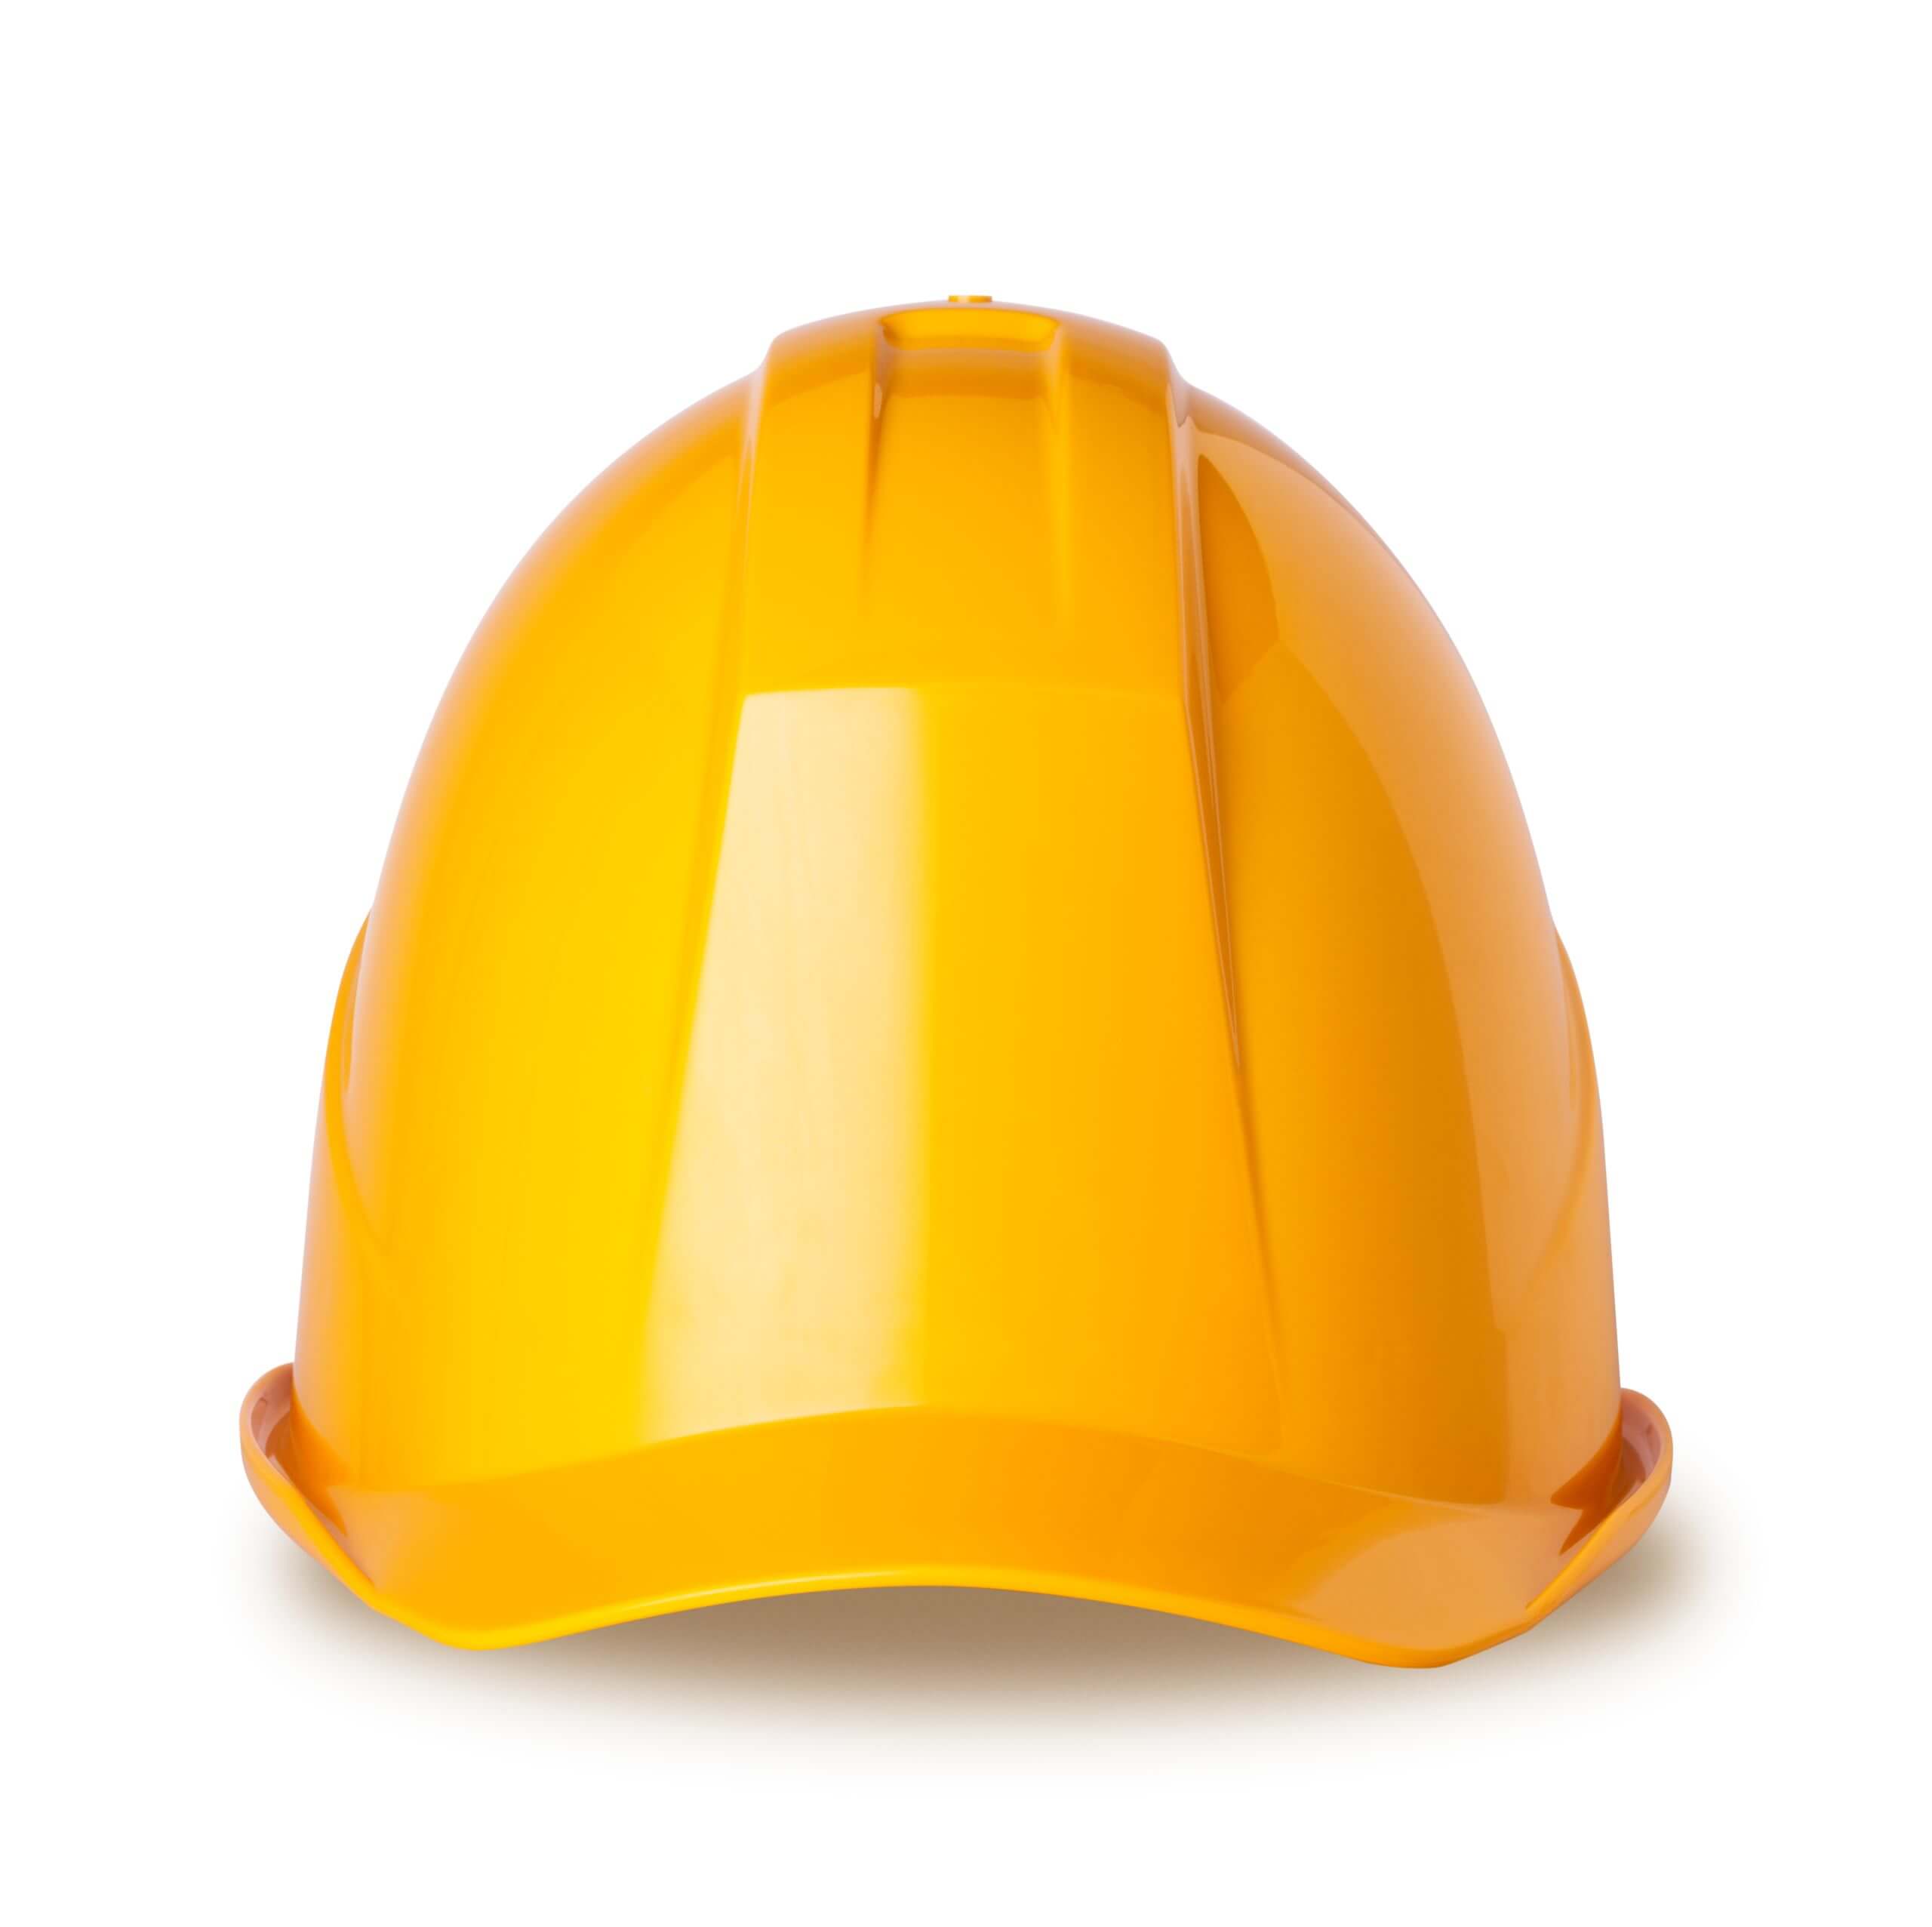 An image showing one of our Industrial Safety Helmets.